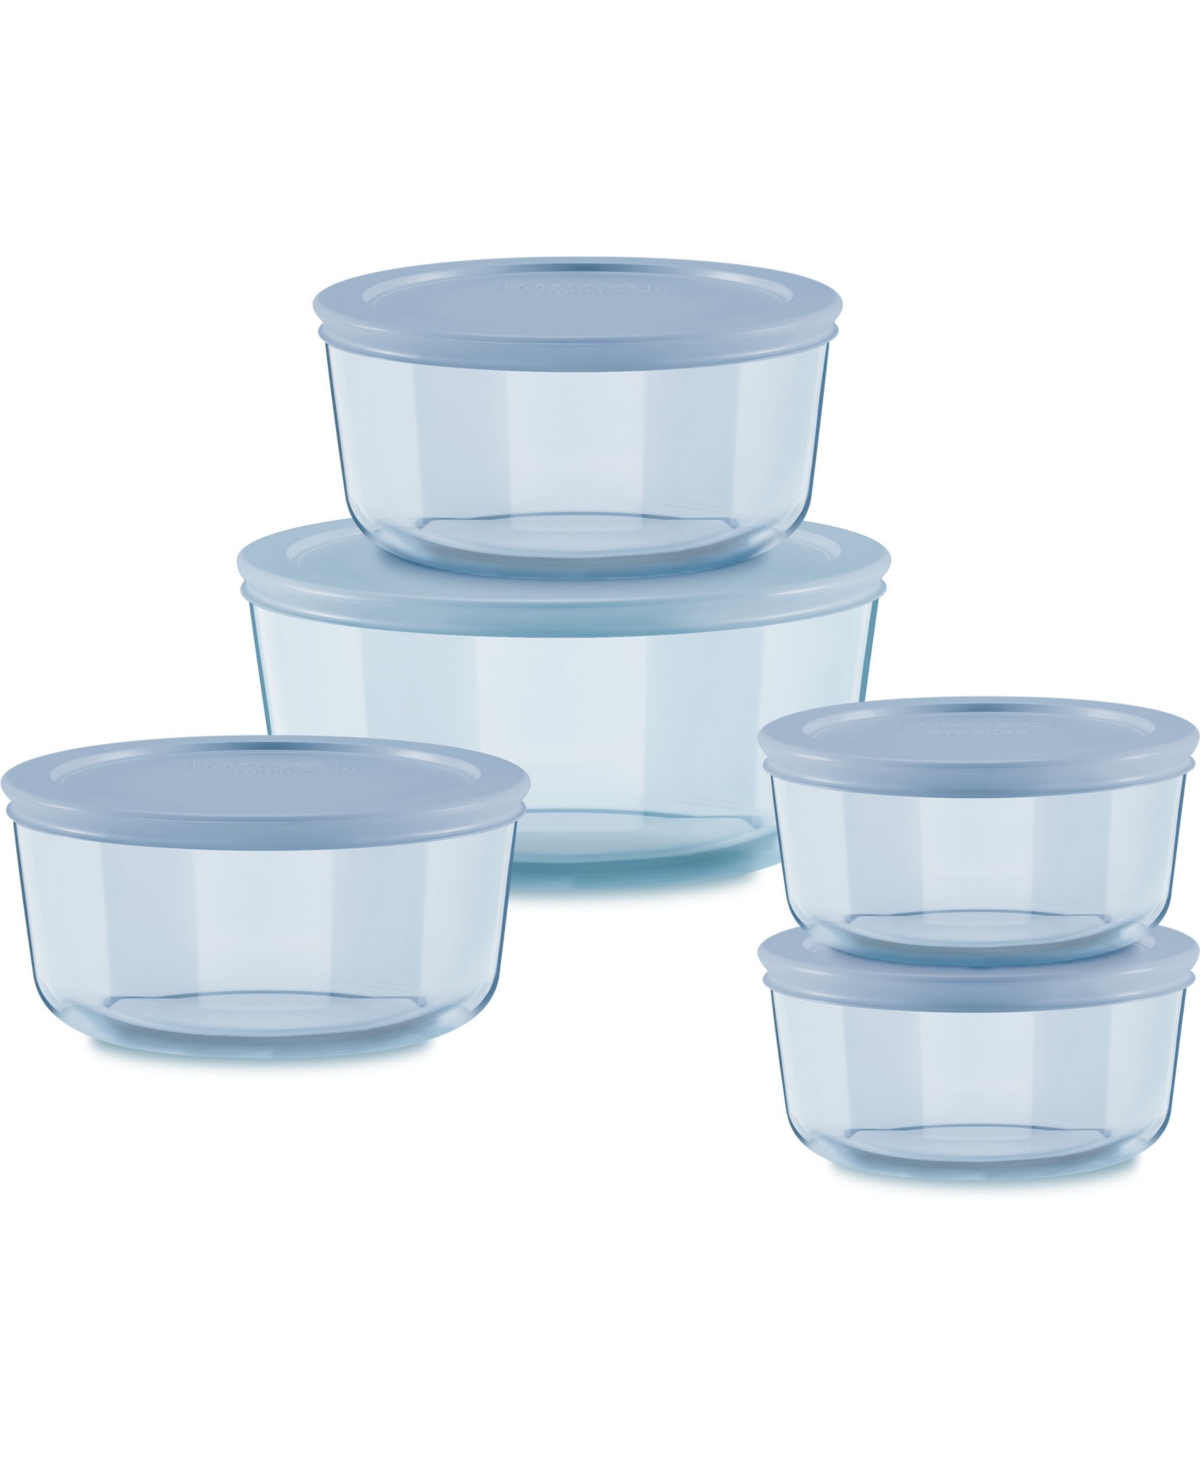 Pyrex Simply Store Tinted 10-pc Round Storage Set With Plastic Lids In Blue